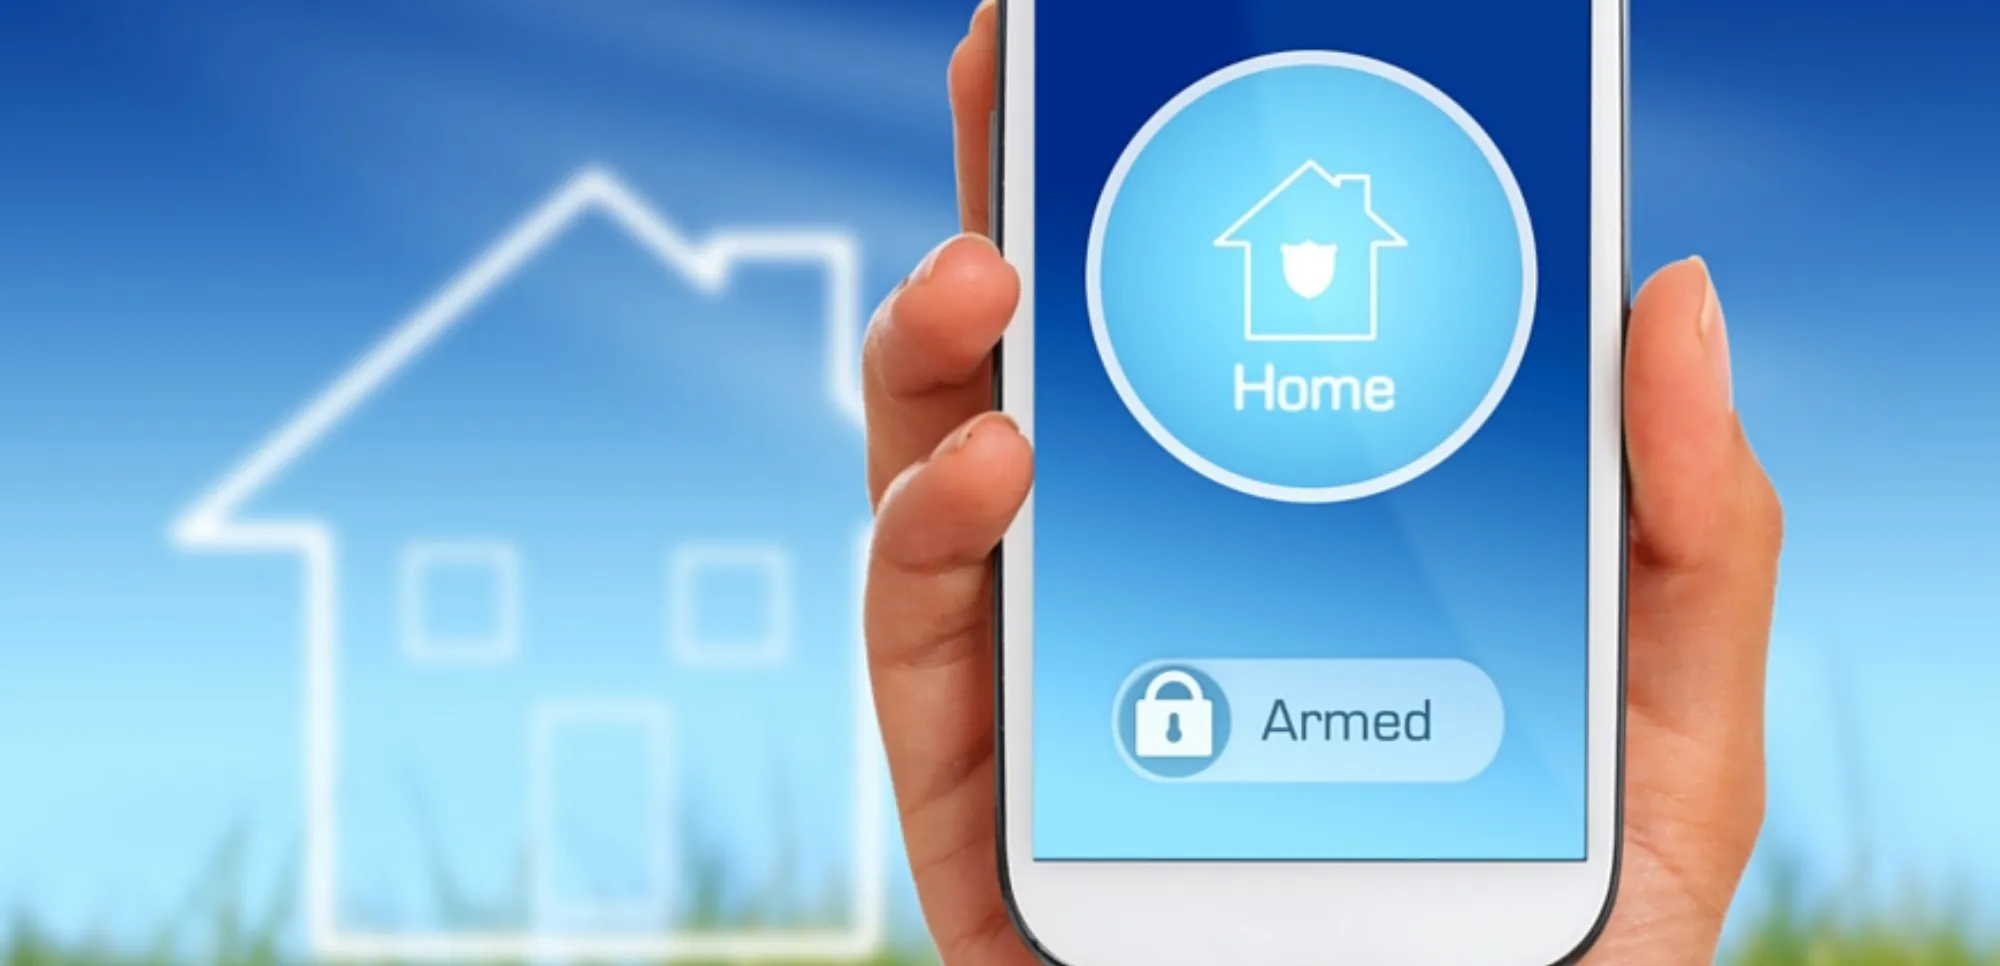 Security Alarm Systems and Alarm Monitoring for homes and businesses in Nelson, Richmond, Stoke, Atawhai, Motueka, Golden Bay